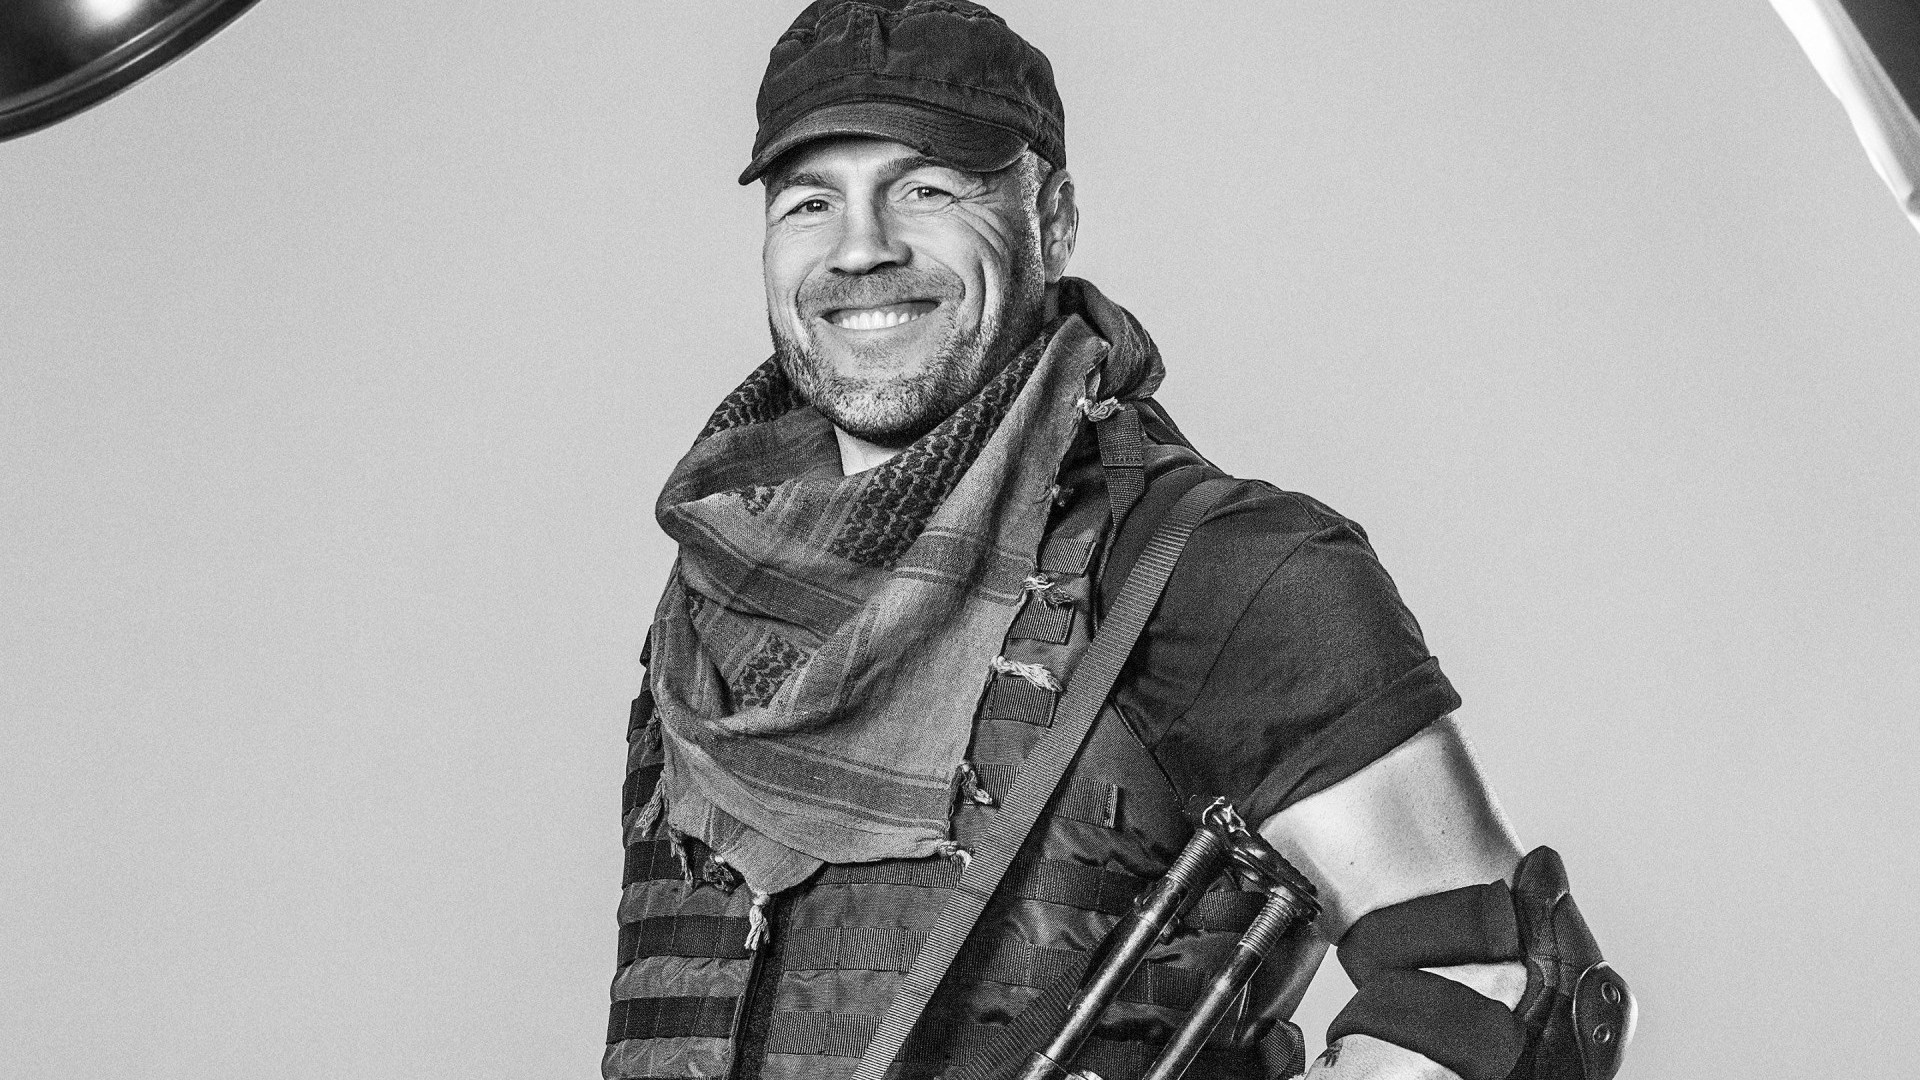 1920x1080 Posing Randy Couture fÃ¼r The Expendables 3